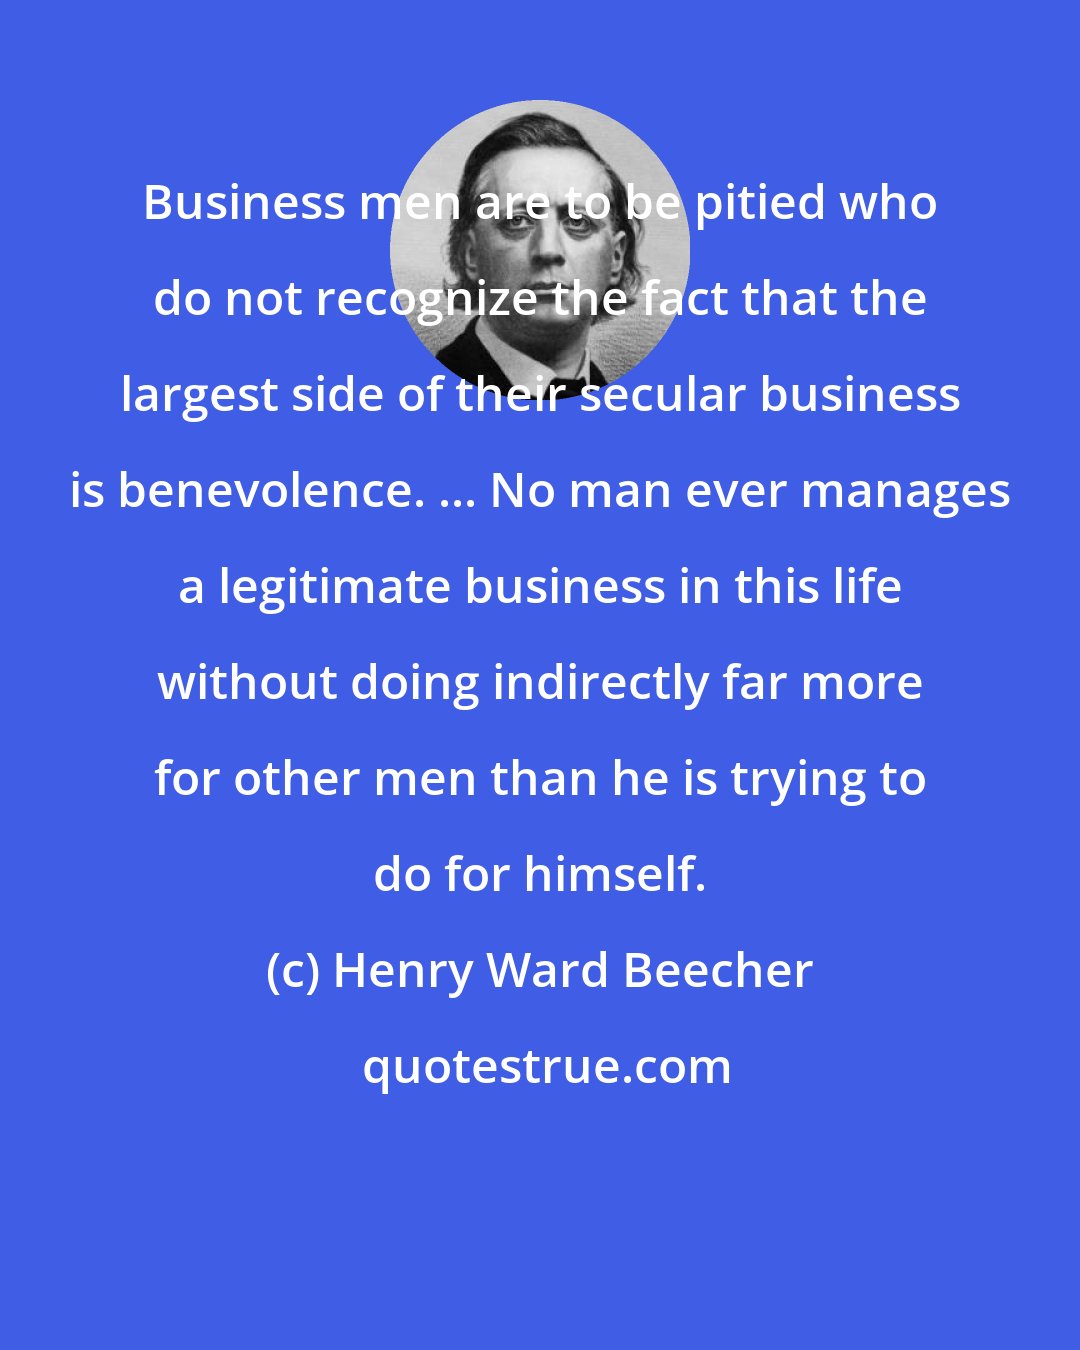 Henry Ward Beecher: Business men are to be pitied who do not recognize the fact that the largest side of their secular business is benevolence. ... No man ever manages a legitimate business in this life without doing indirectly far more for other men than he is trying to do for himself.